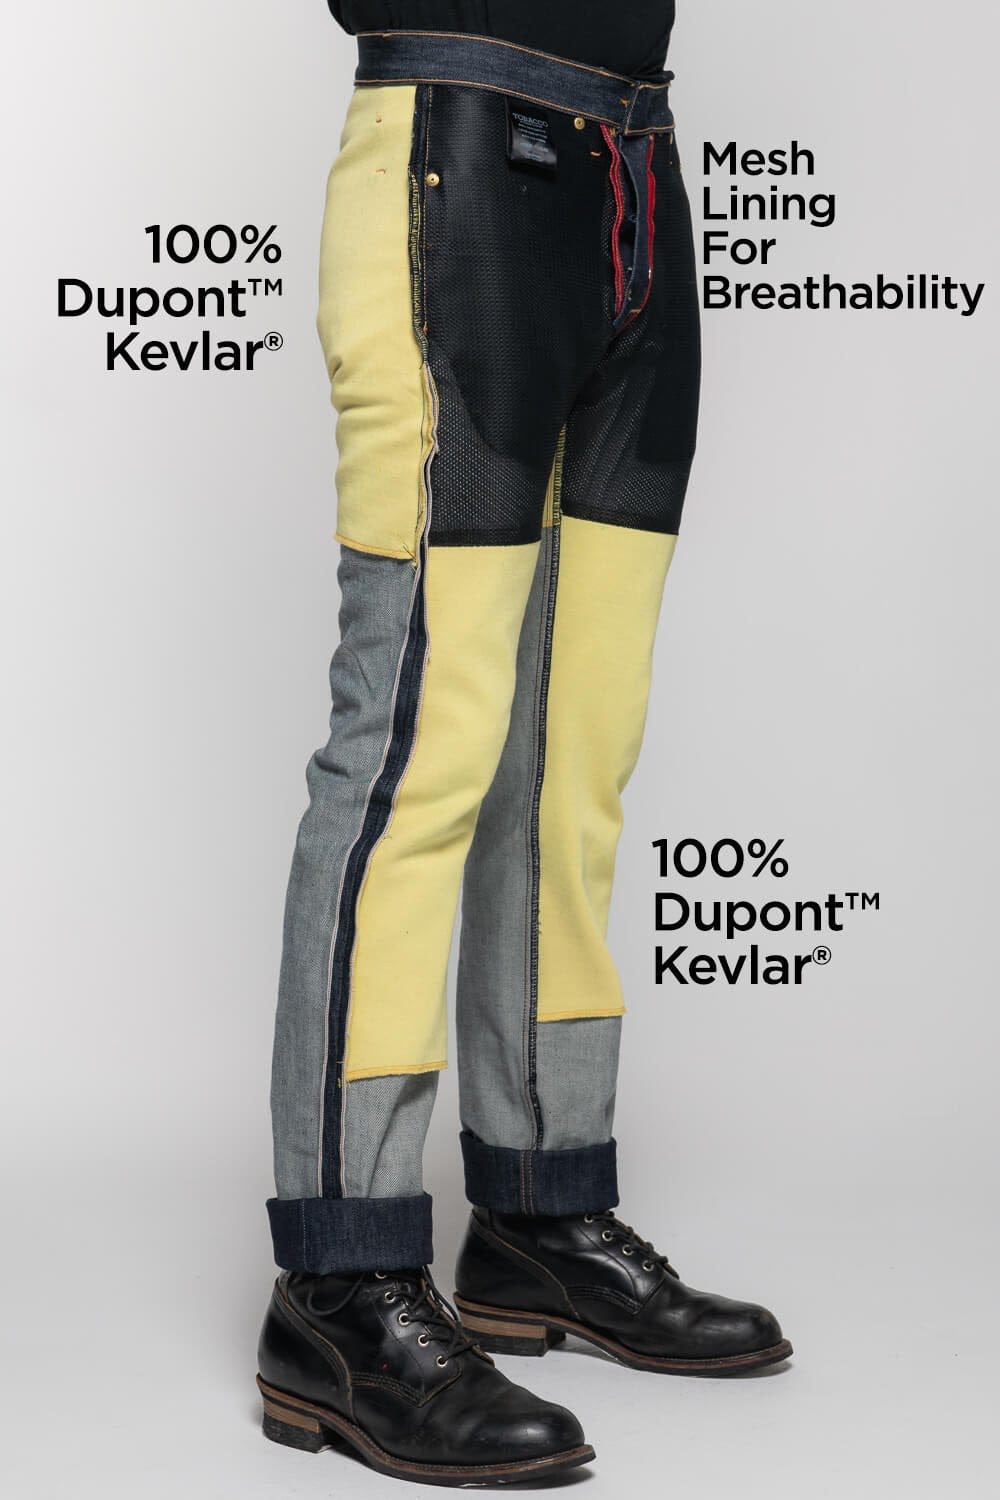 Riot Skinny Fit Protective Riding Jeans. Feat. Protective DuPont™ Kevlar® Lining. Jet Black Prewashed Denim 2% Stretch. Made Proudly in the USA. - Tobacco Motorwear